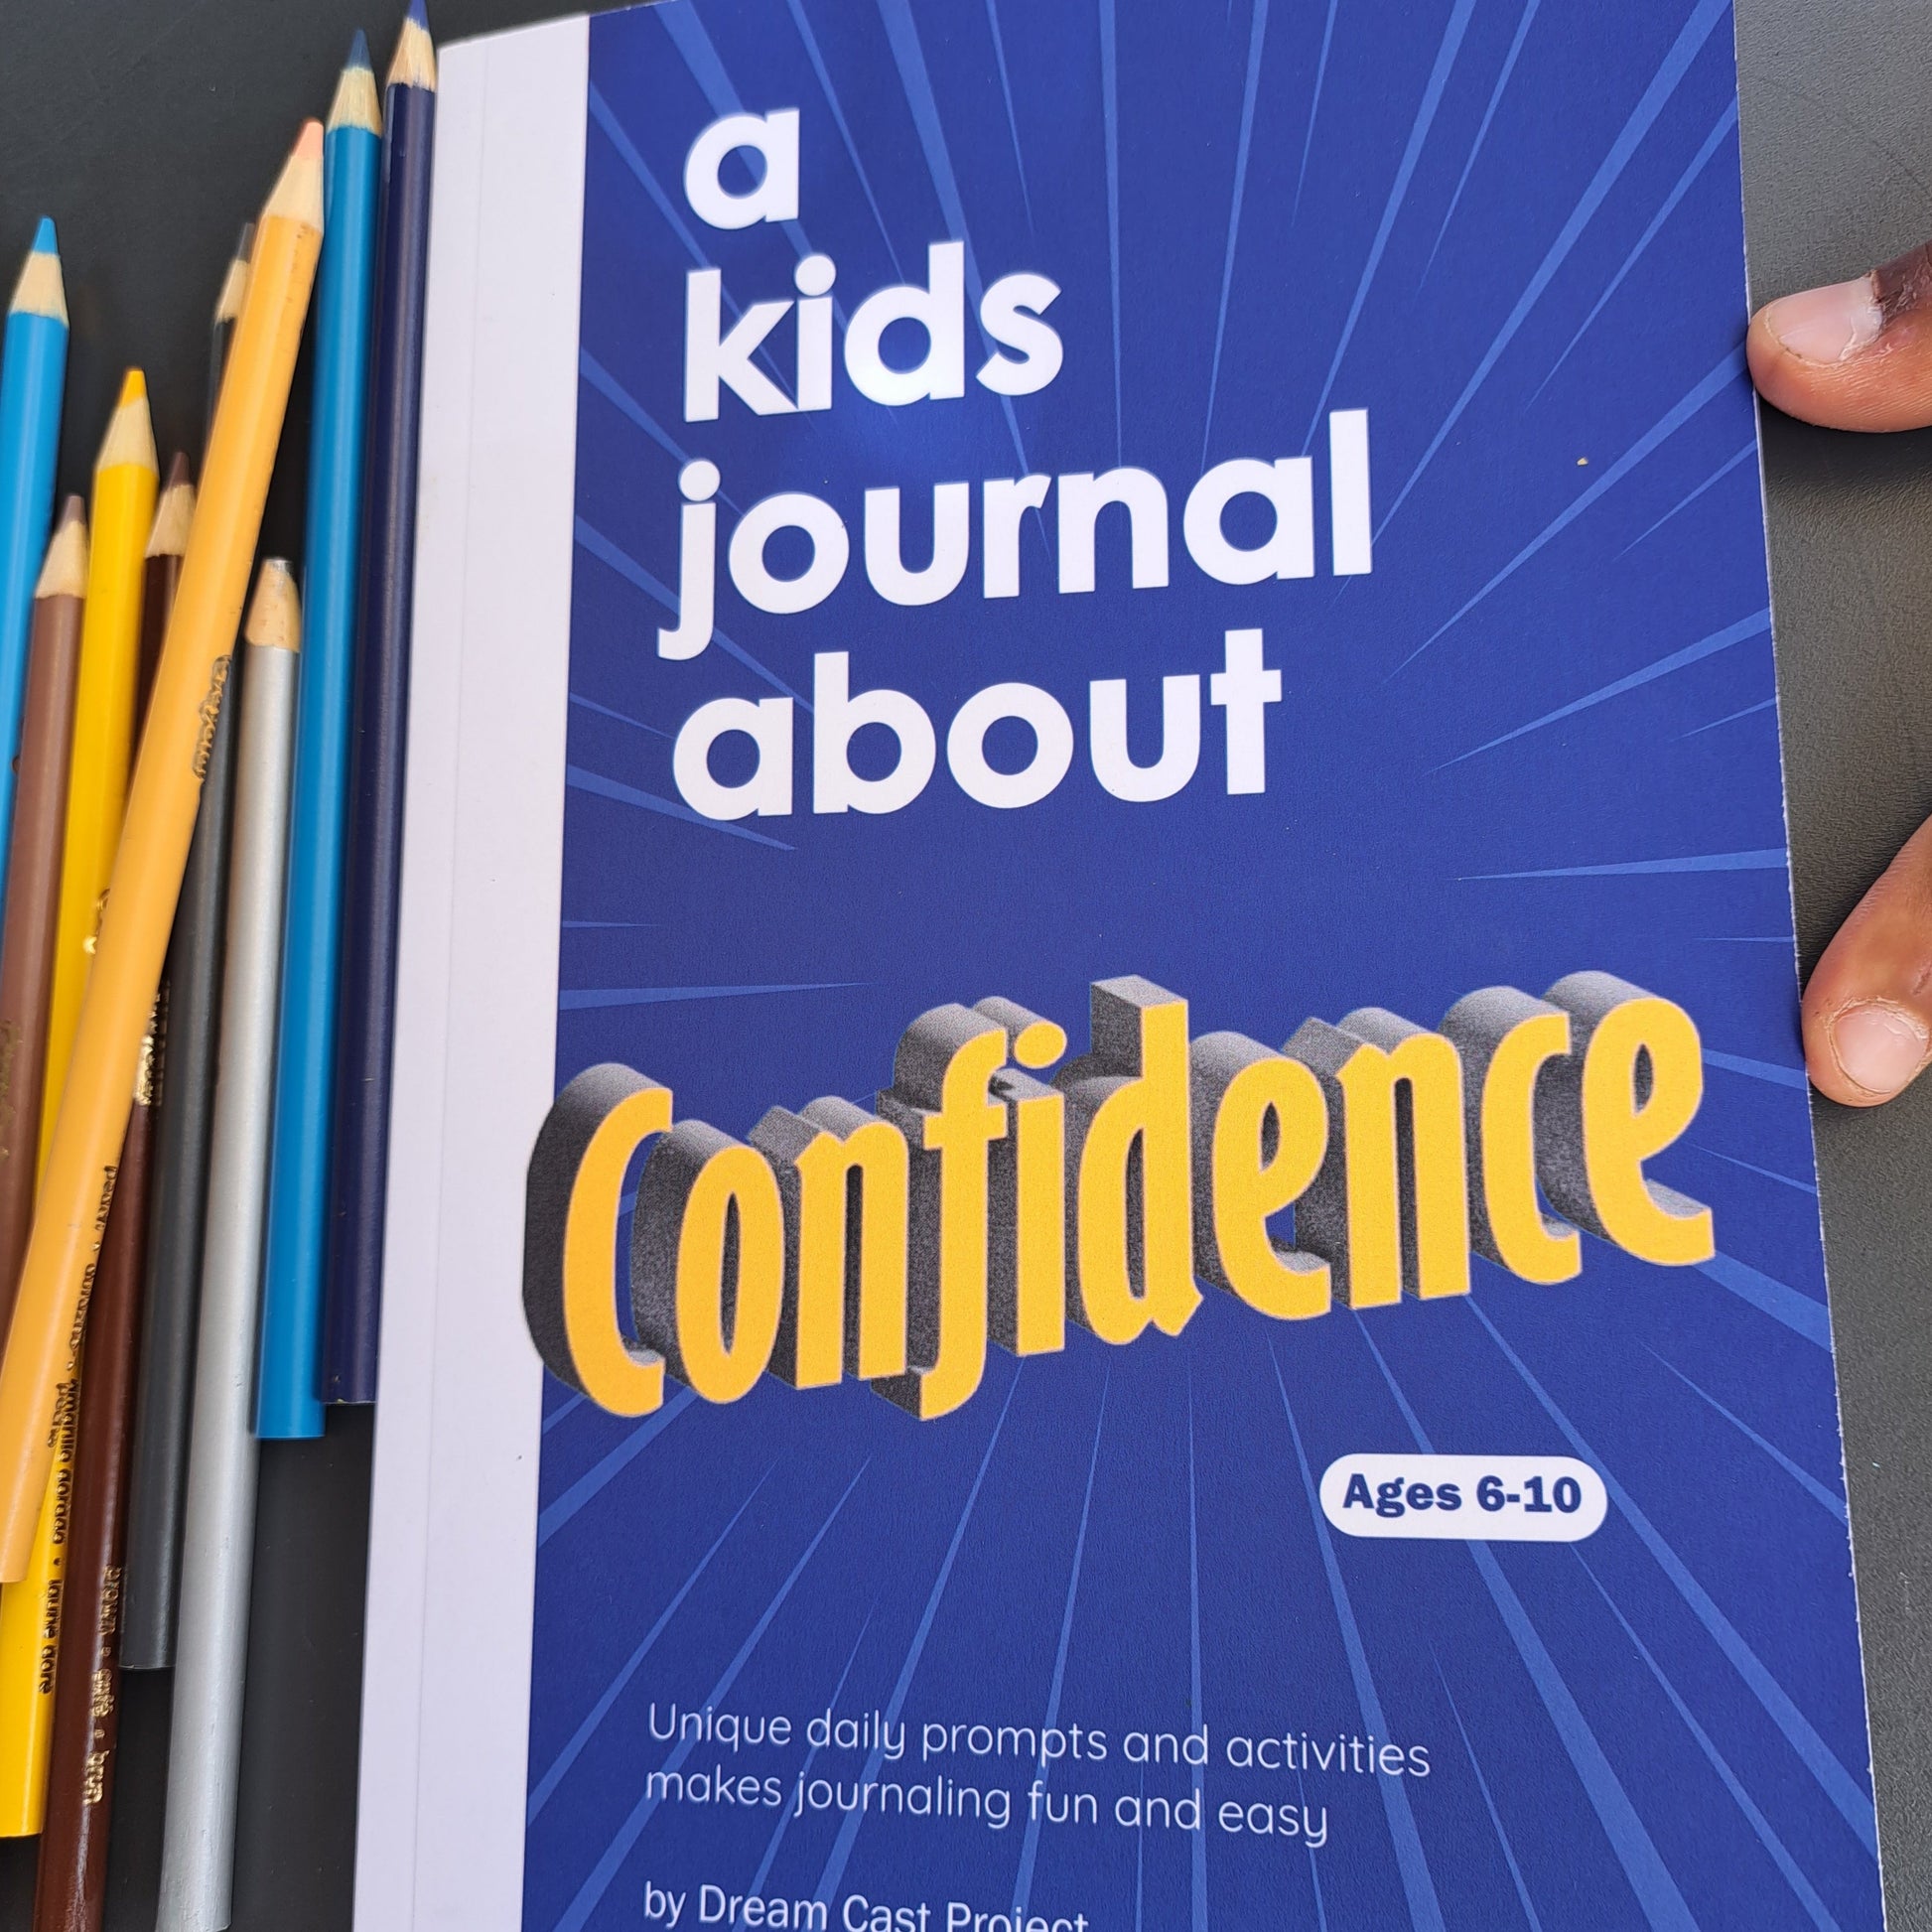 A Kids Journal About... (10 book series) - Confidence